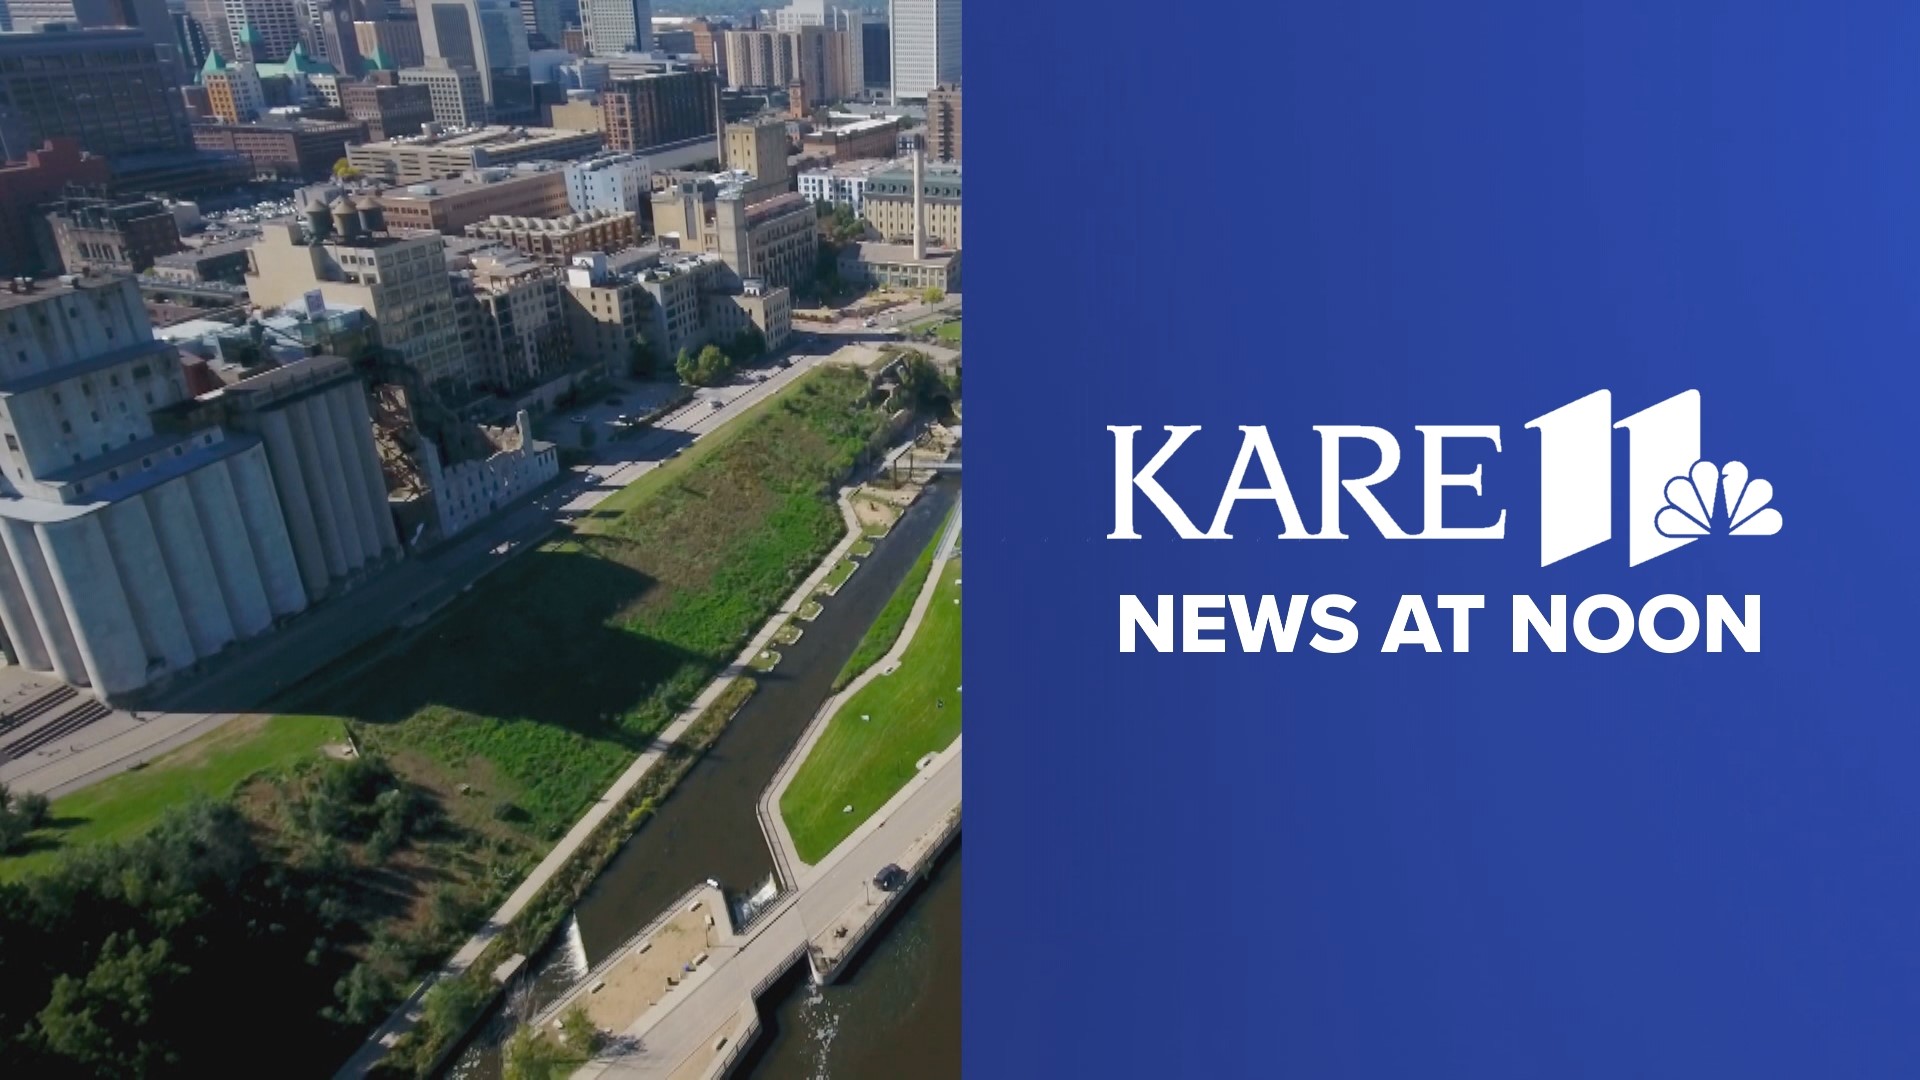 Get a midday update on news and weather from the KARE 11 News team.